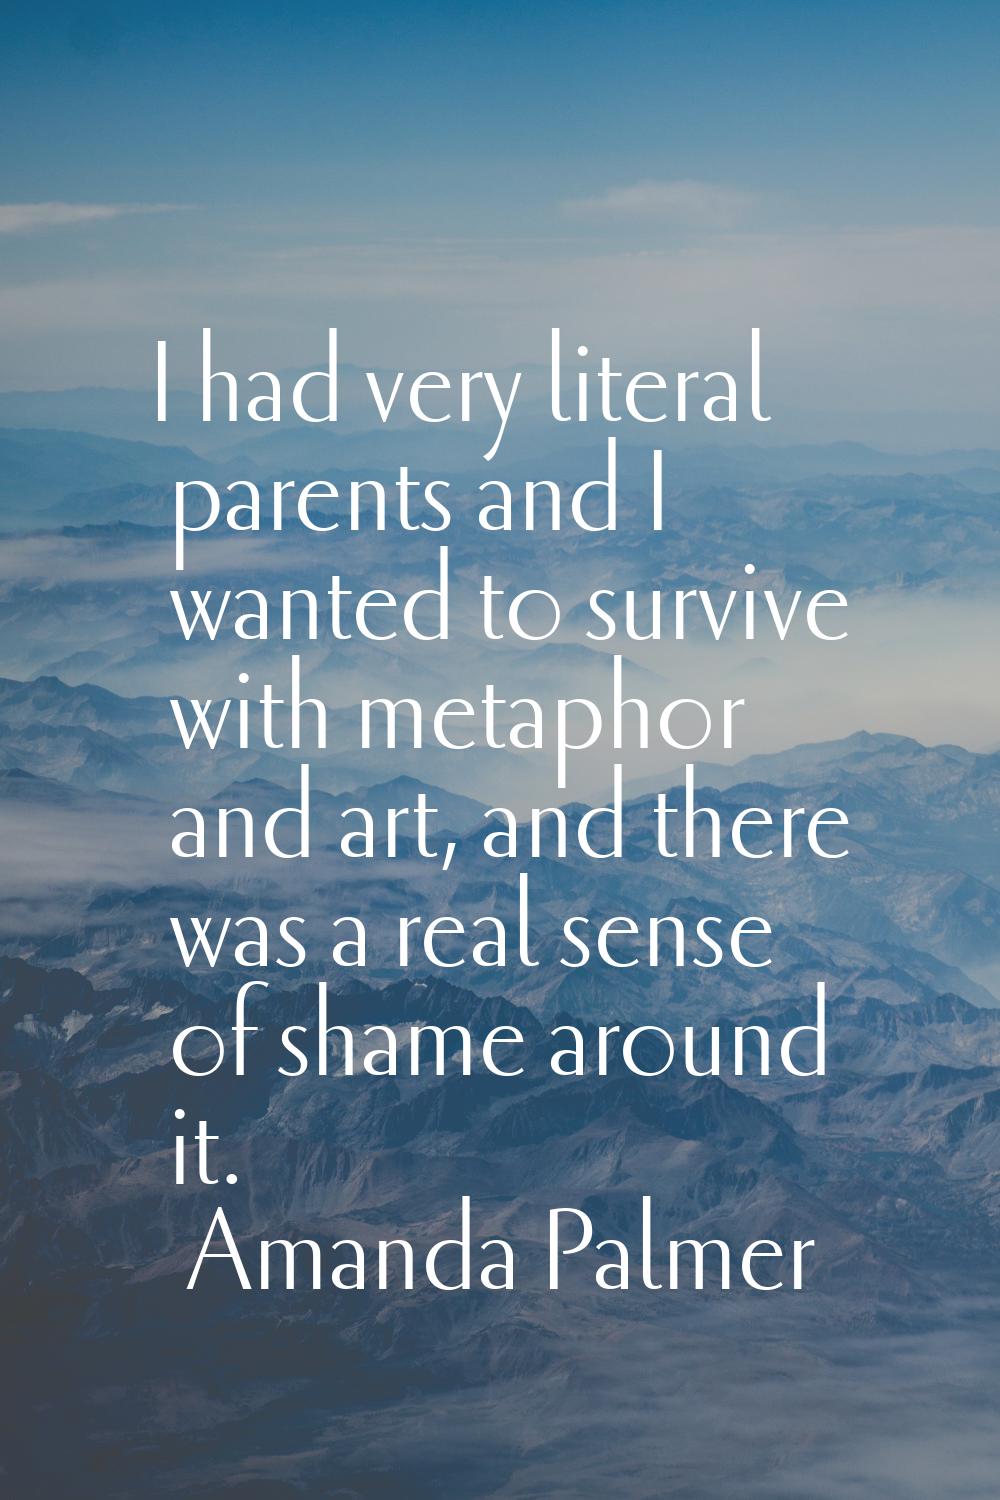 I had very literal parents and I wanted to survive with metaphor and art, and there was a real sens